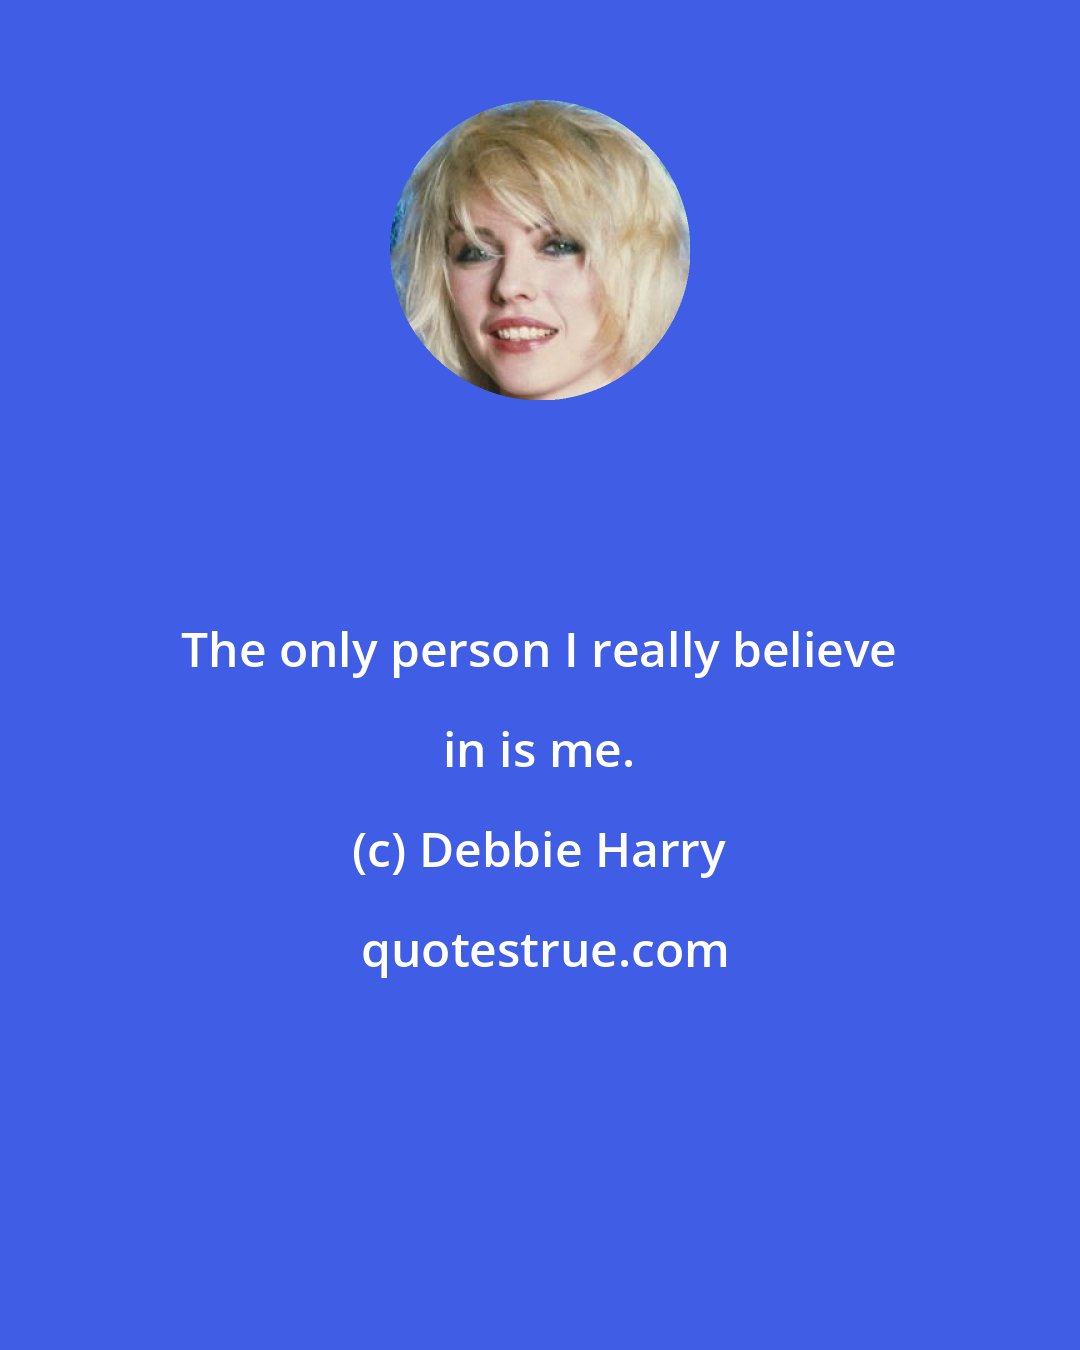 Debbie Harry: The only person I really believe in is me.